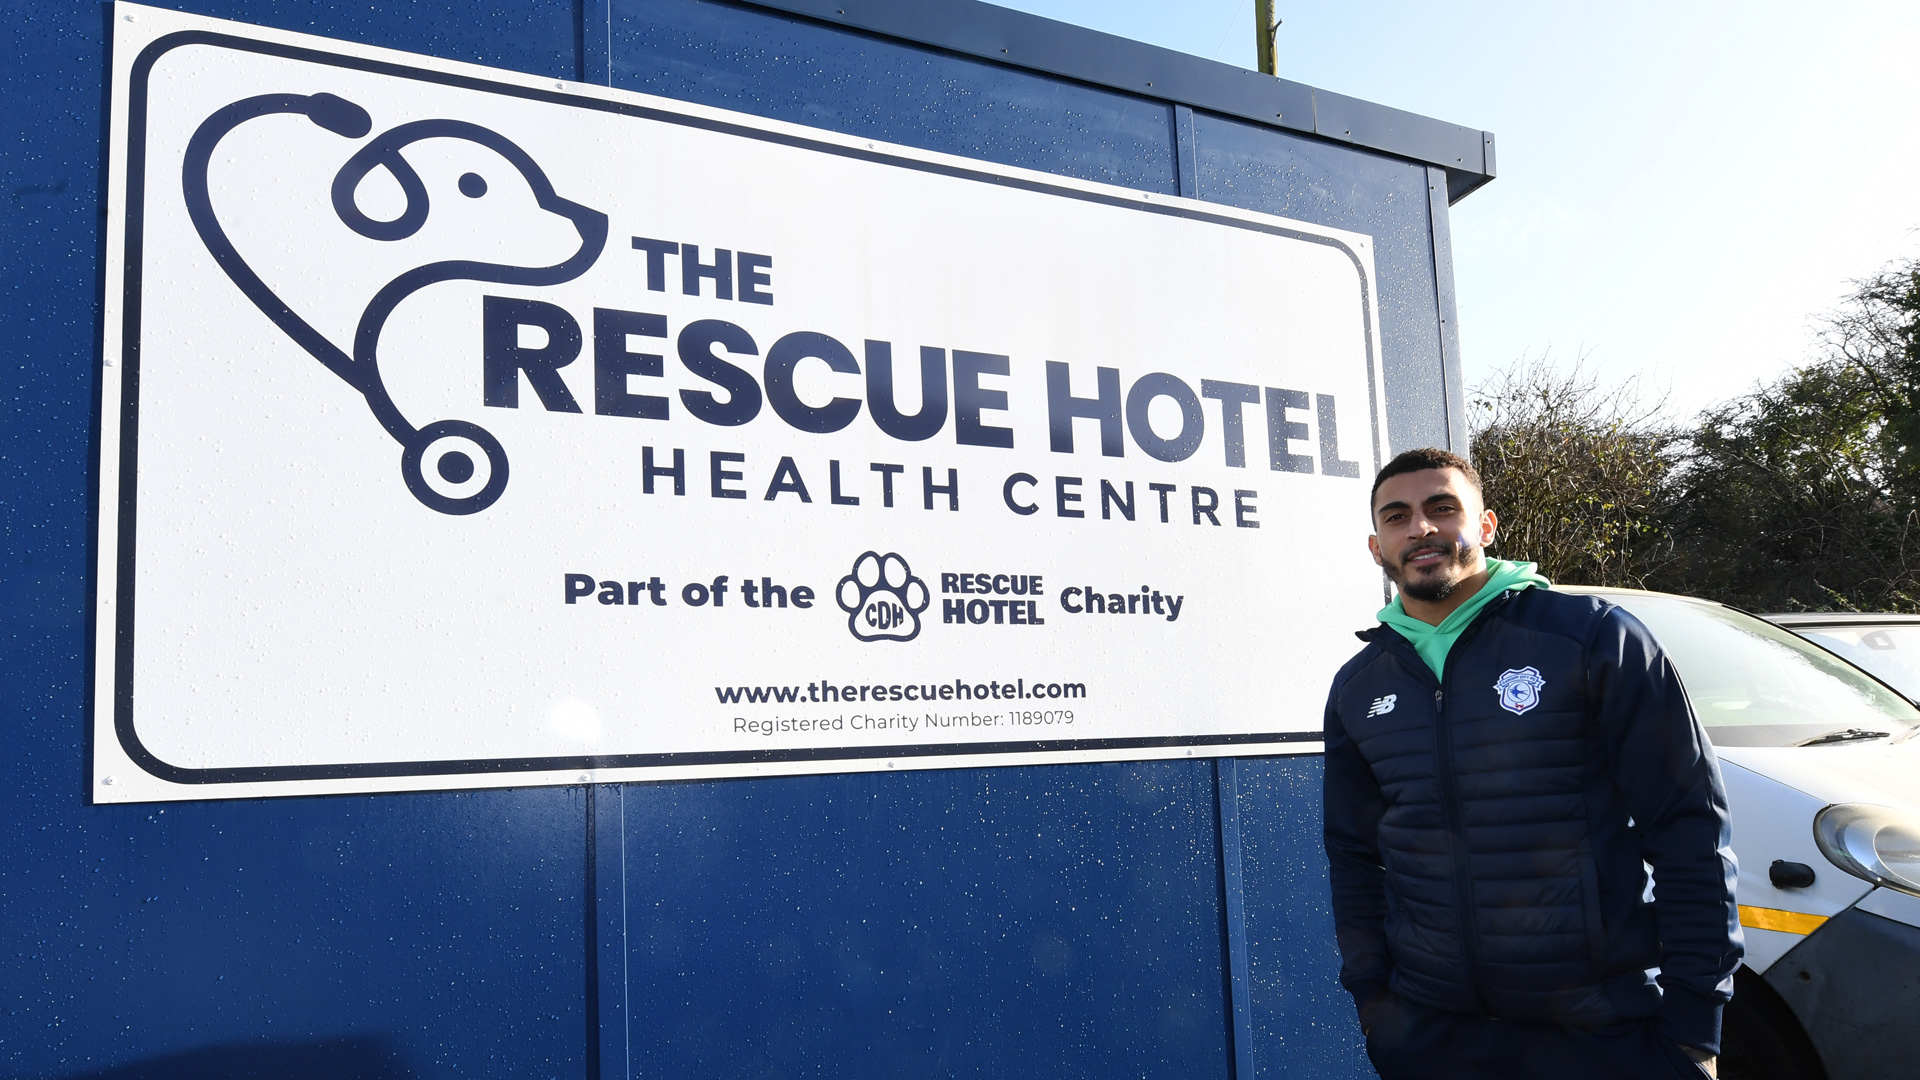 The Rescue Hotel is the official charity of Cardiff Dogs Home...